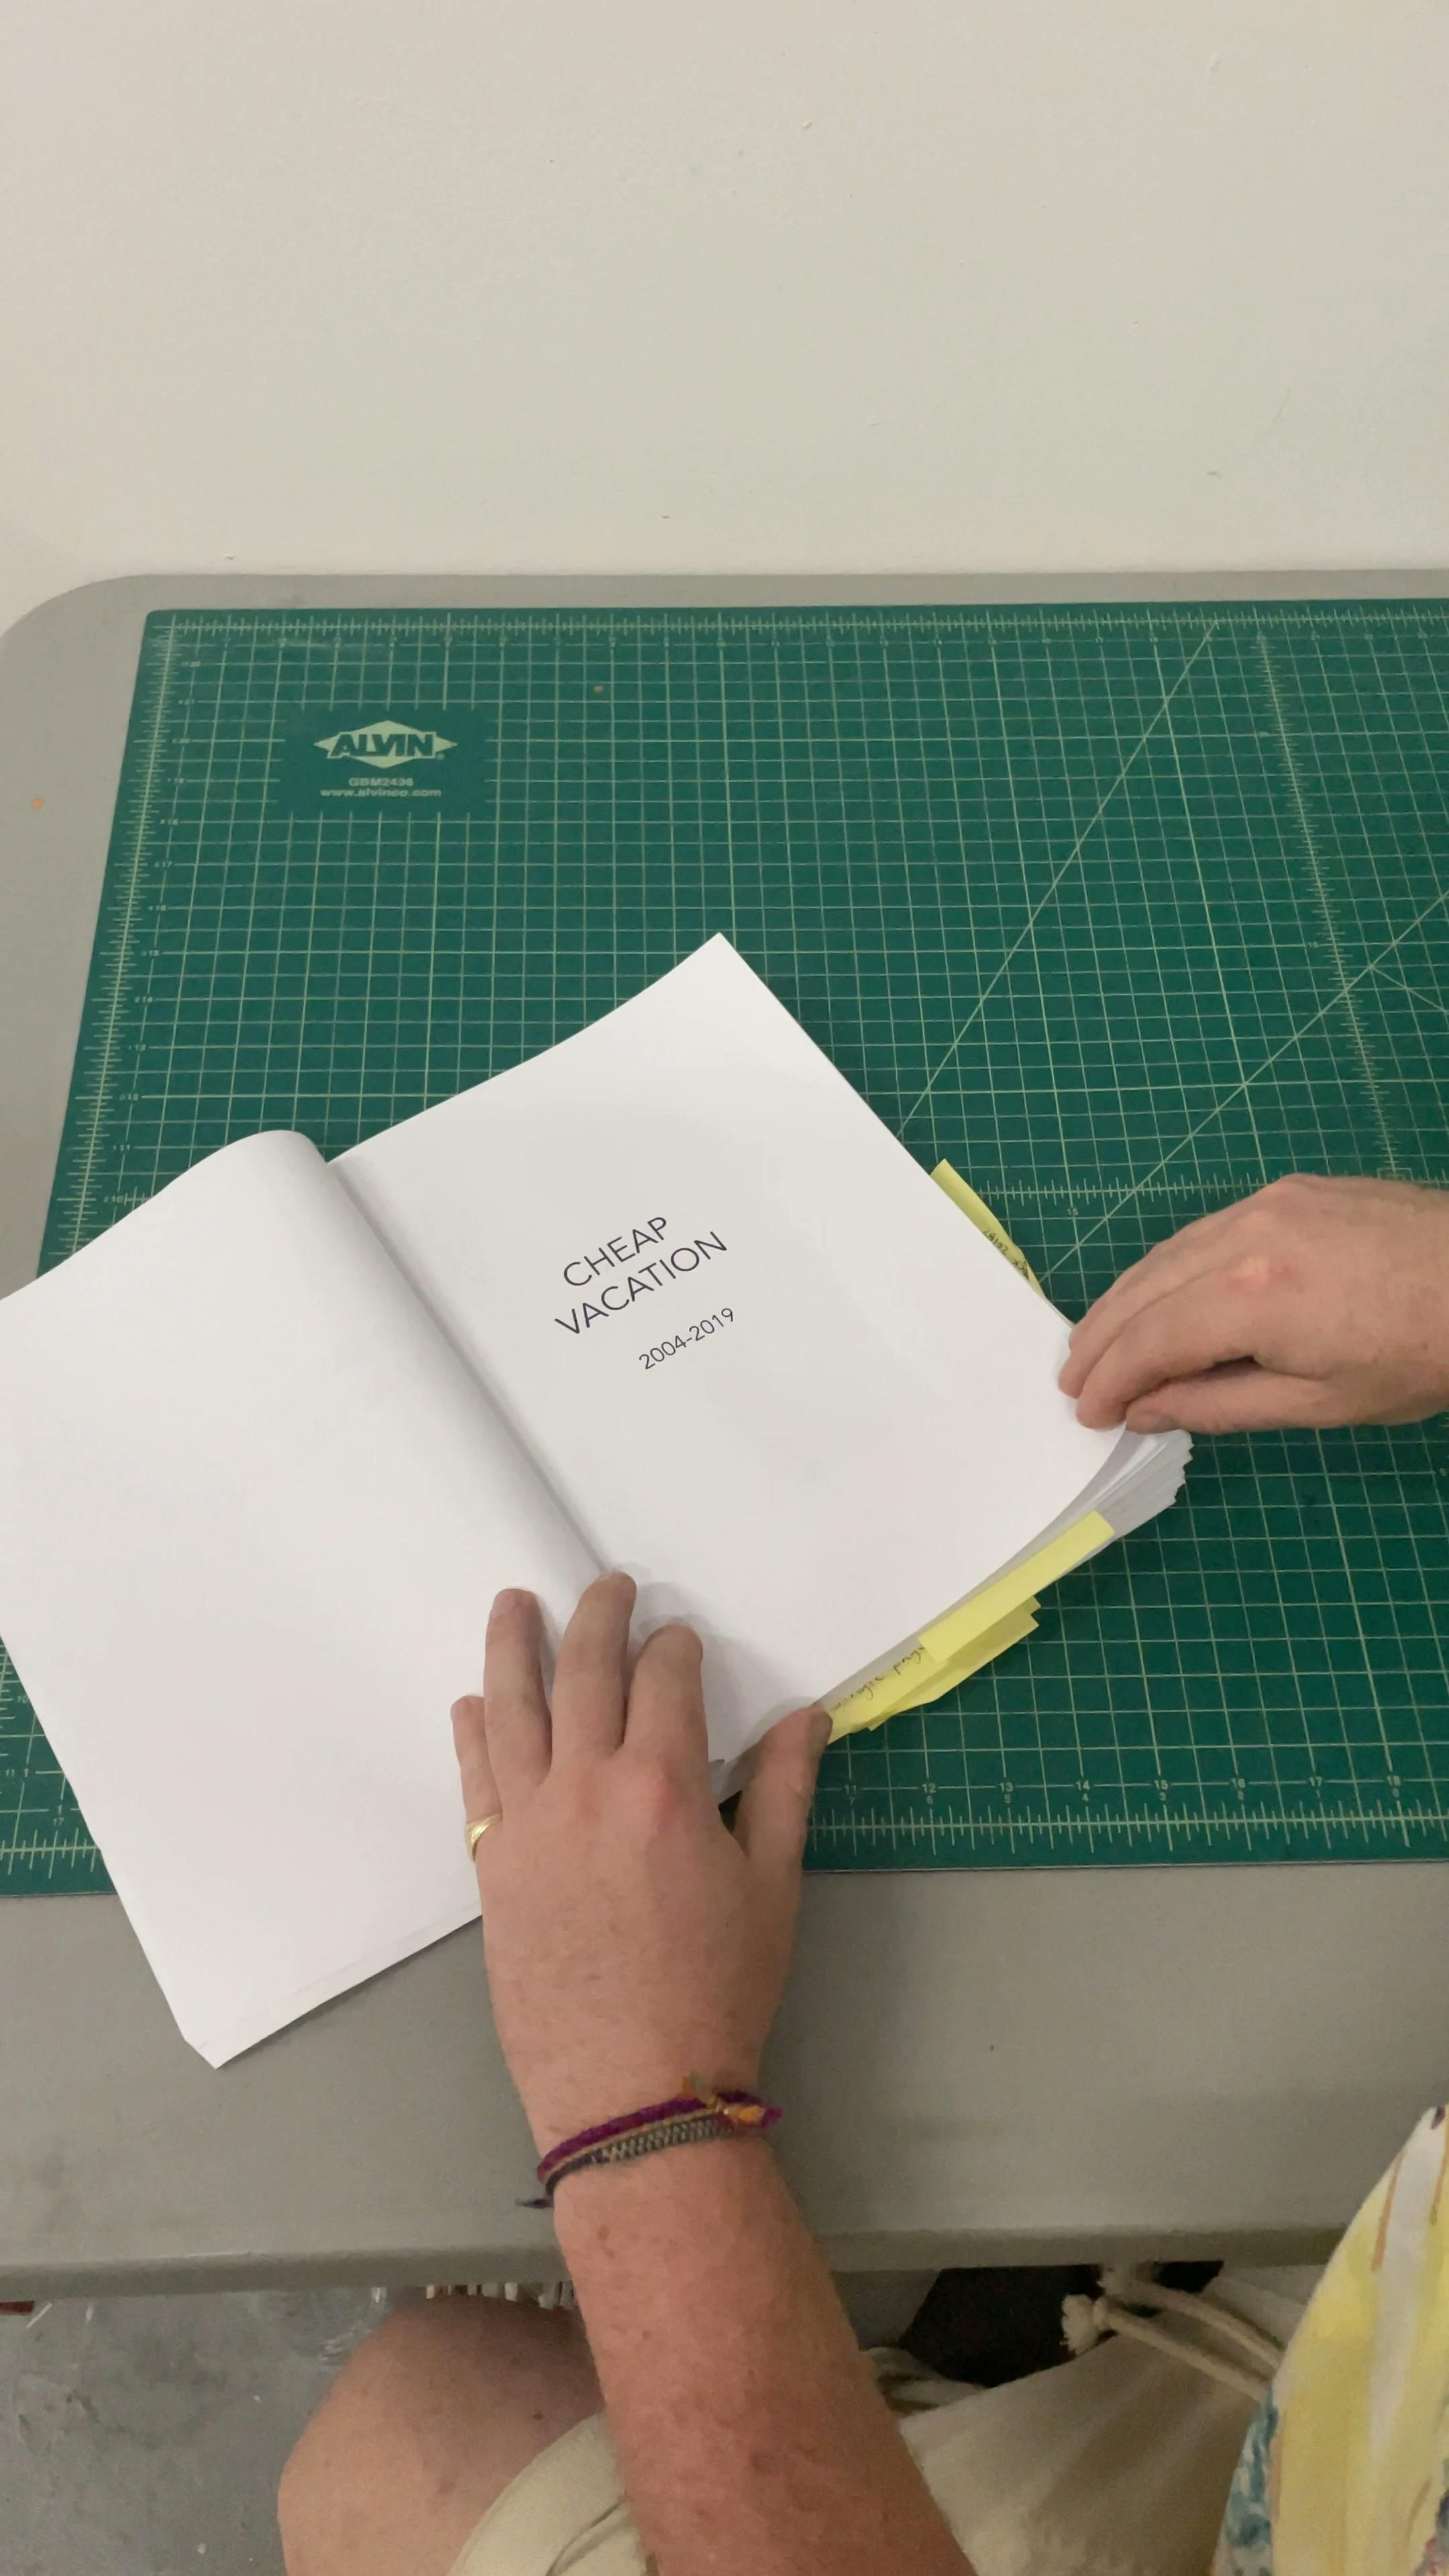 A closeup of artist Ryan James MacFarland flipping through a white manuscript with the title "CHEAP VACATION" on the front.